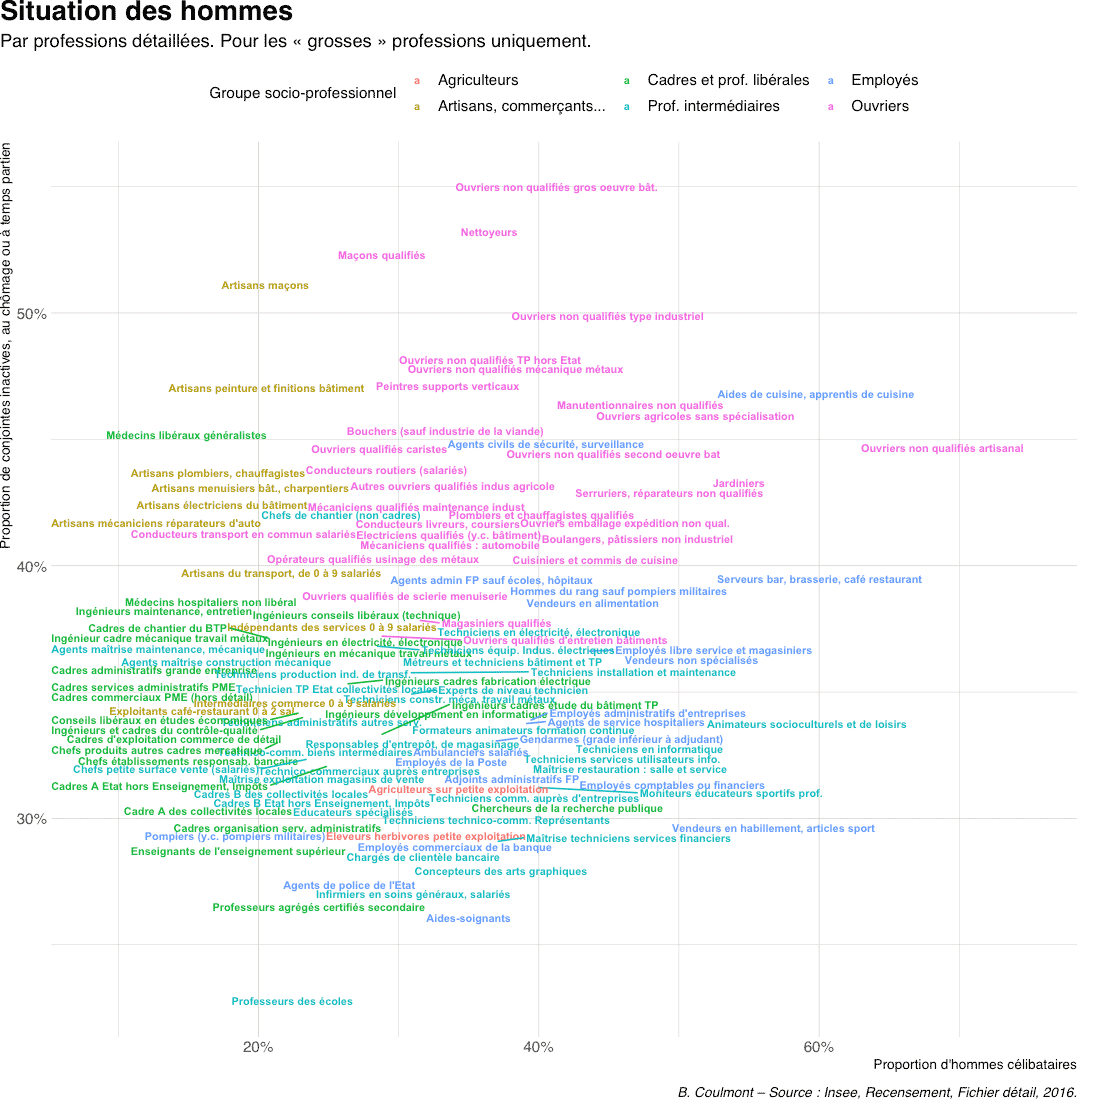 http://coulmont.com/vordpress/wp-content/uploads/2020/06/hommes_professions_situations_plot_blog.png